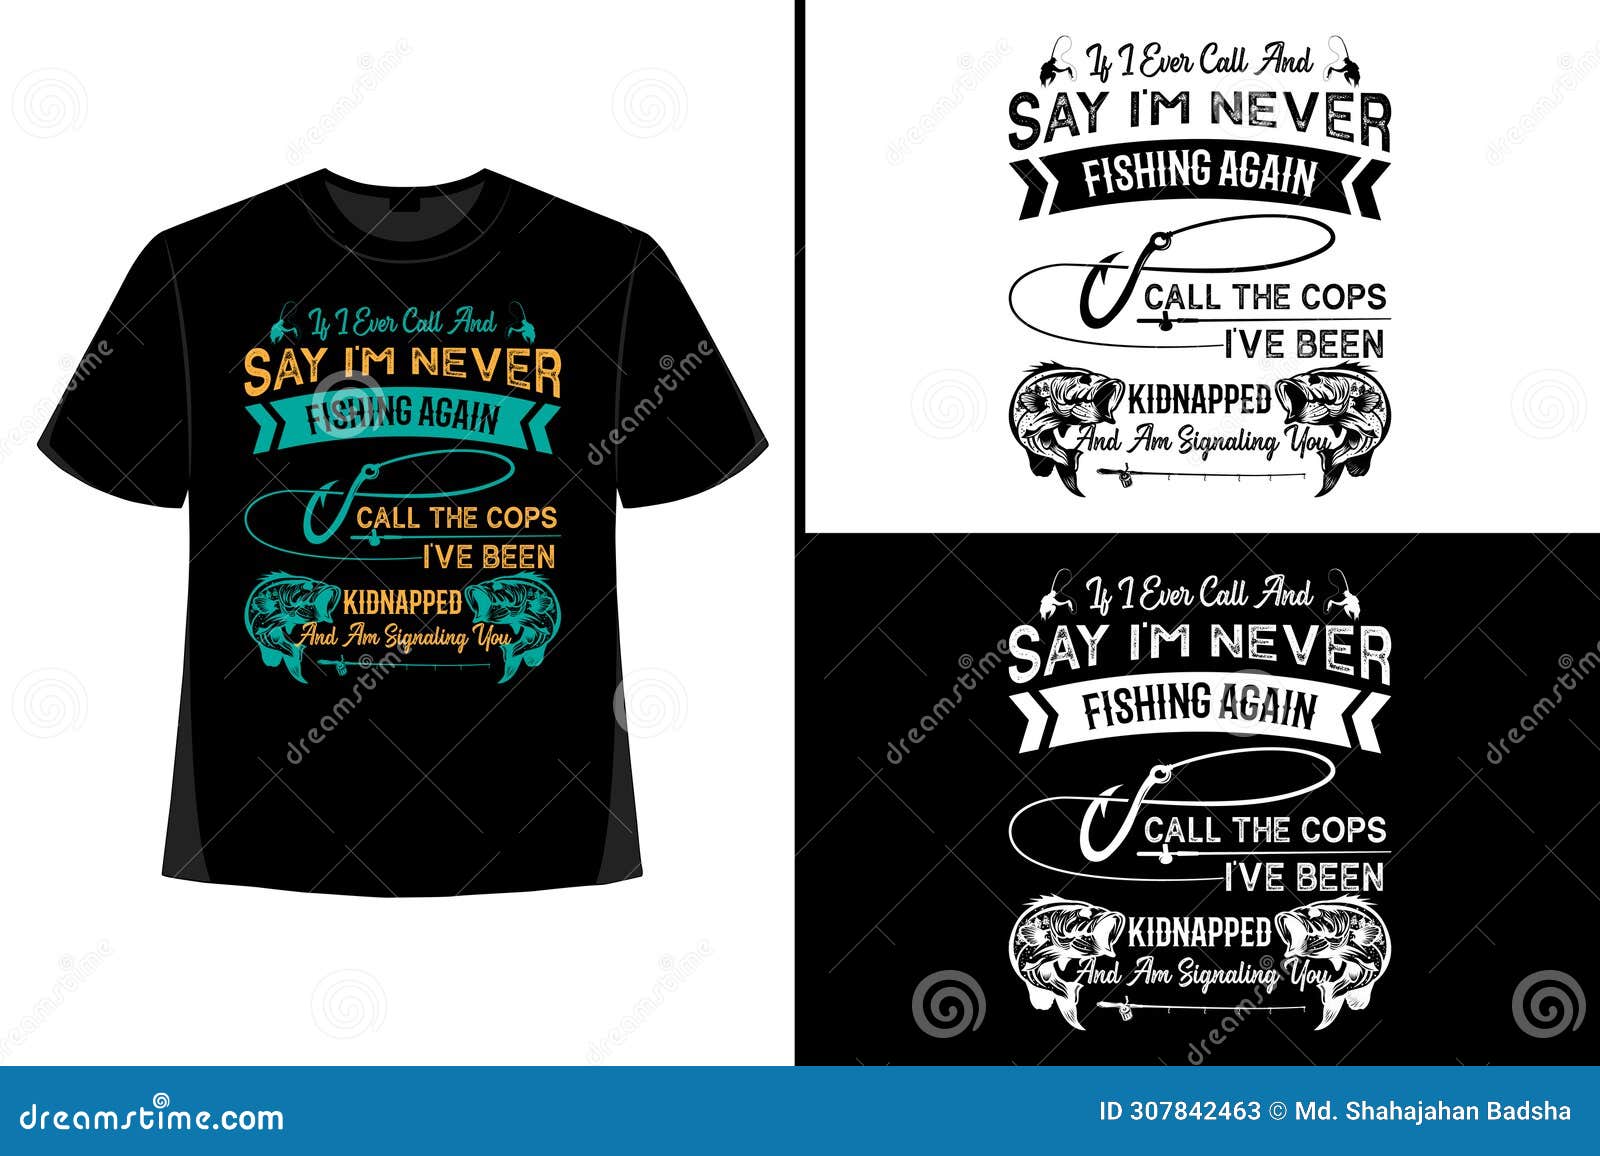 https://thumbs.dreamstime.com/z/fishing-shirt-vintage-t-typography-quote-fish-man-lover-discover-inspired-shirts-trendy-captivating-quotes-perfect-307842463.jpg